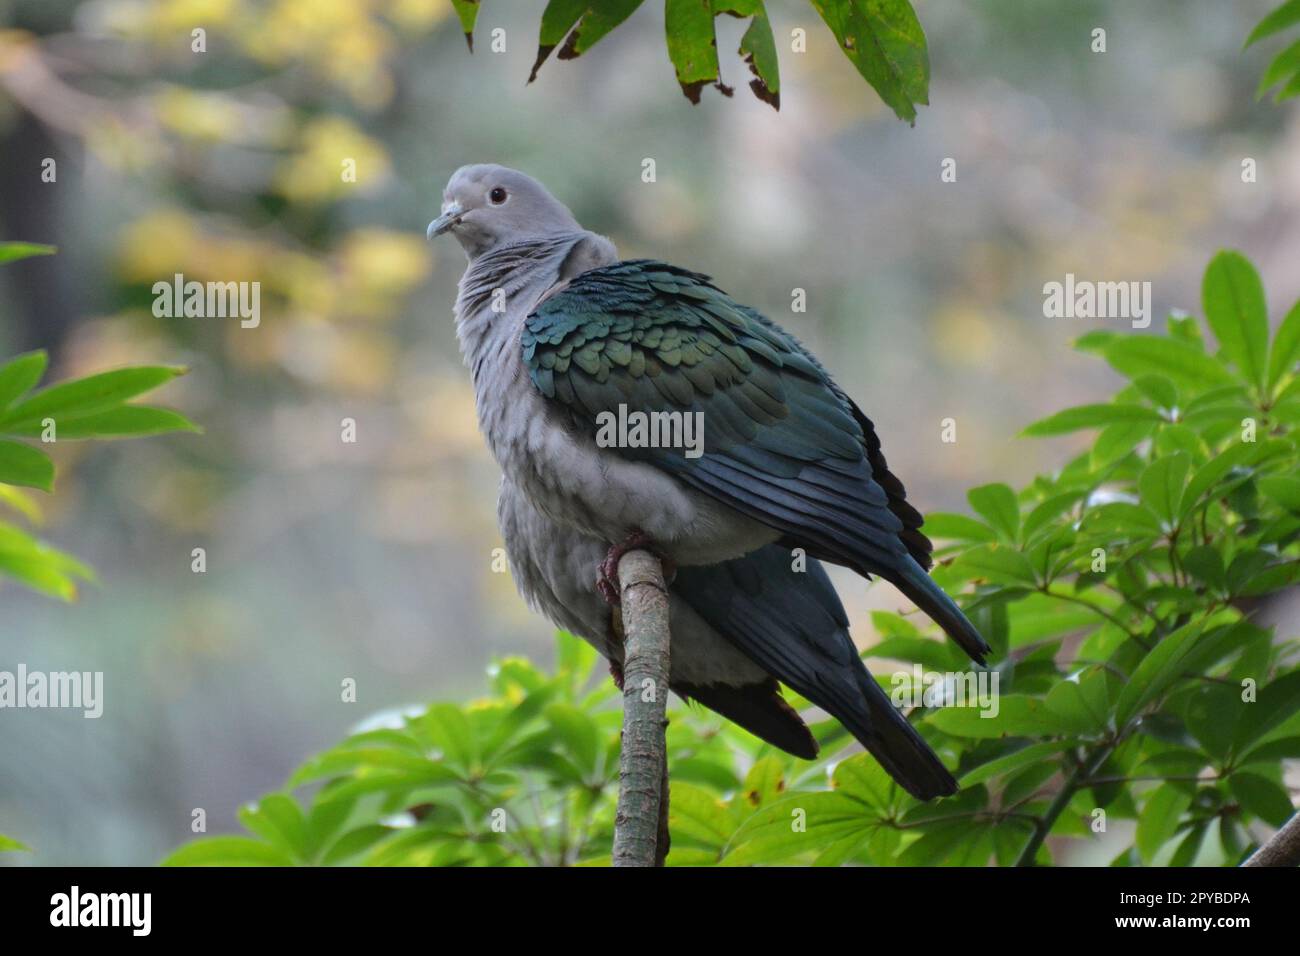 Portrait of a green imperial pigeon, Hong Kong Park Stock Photo